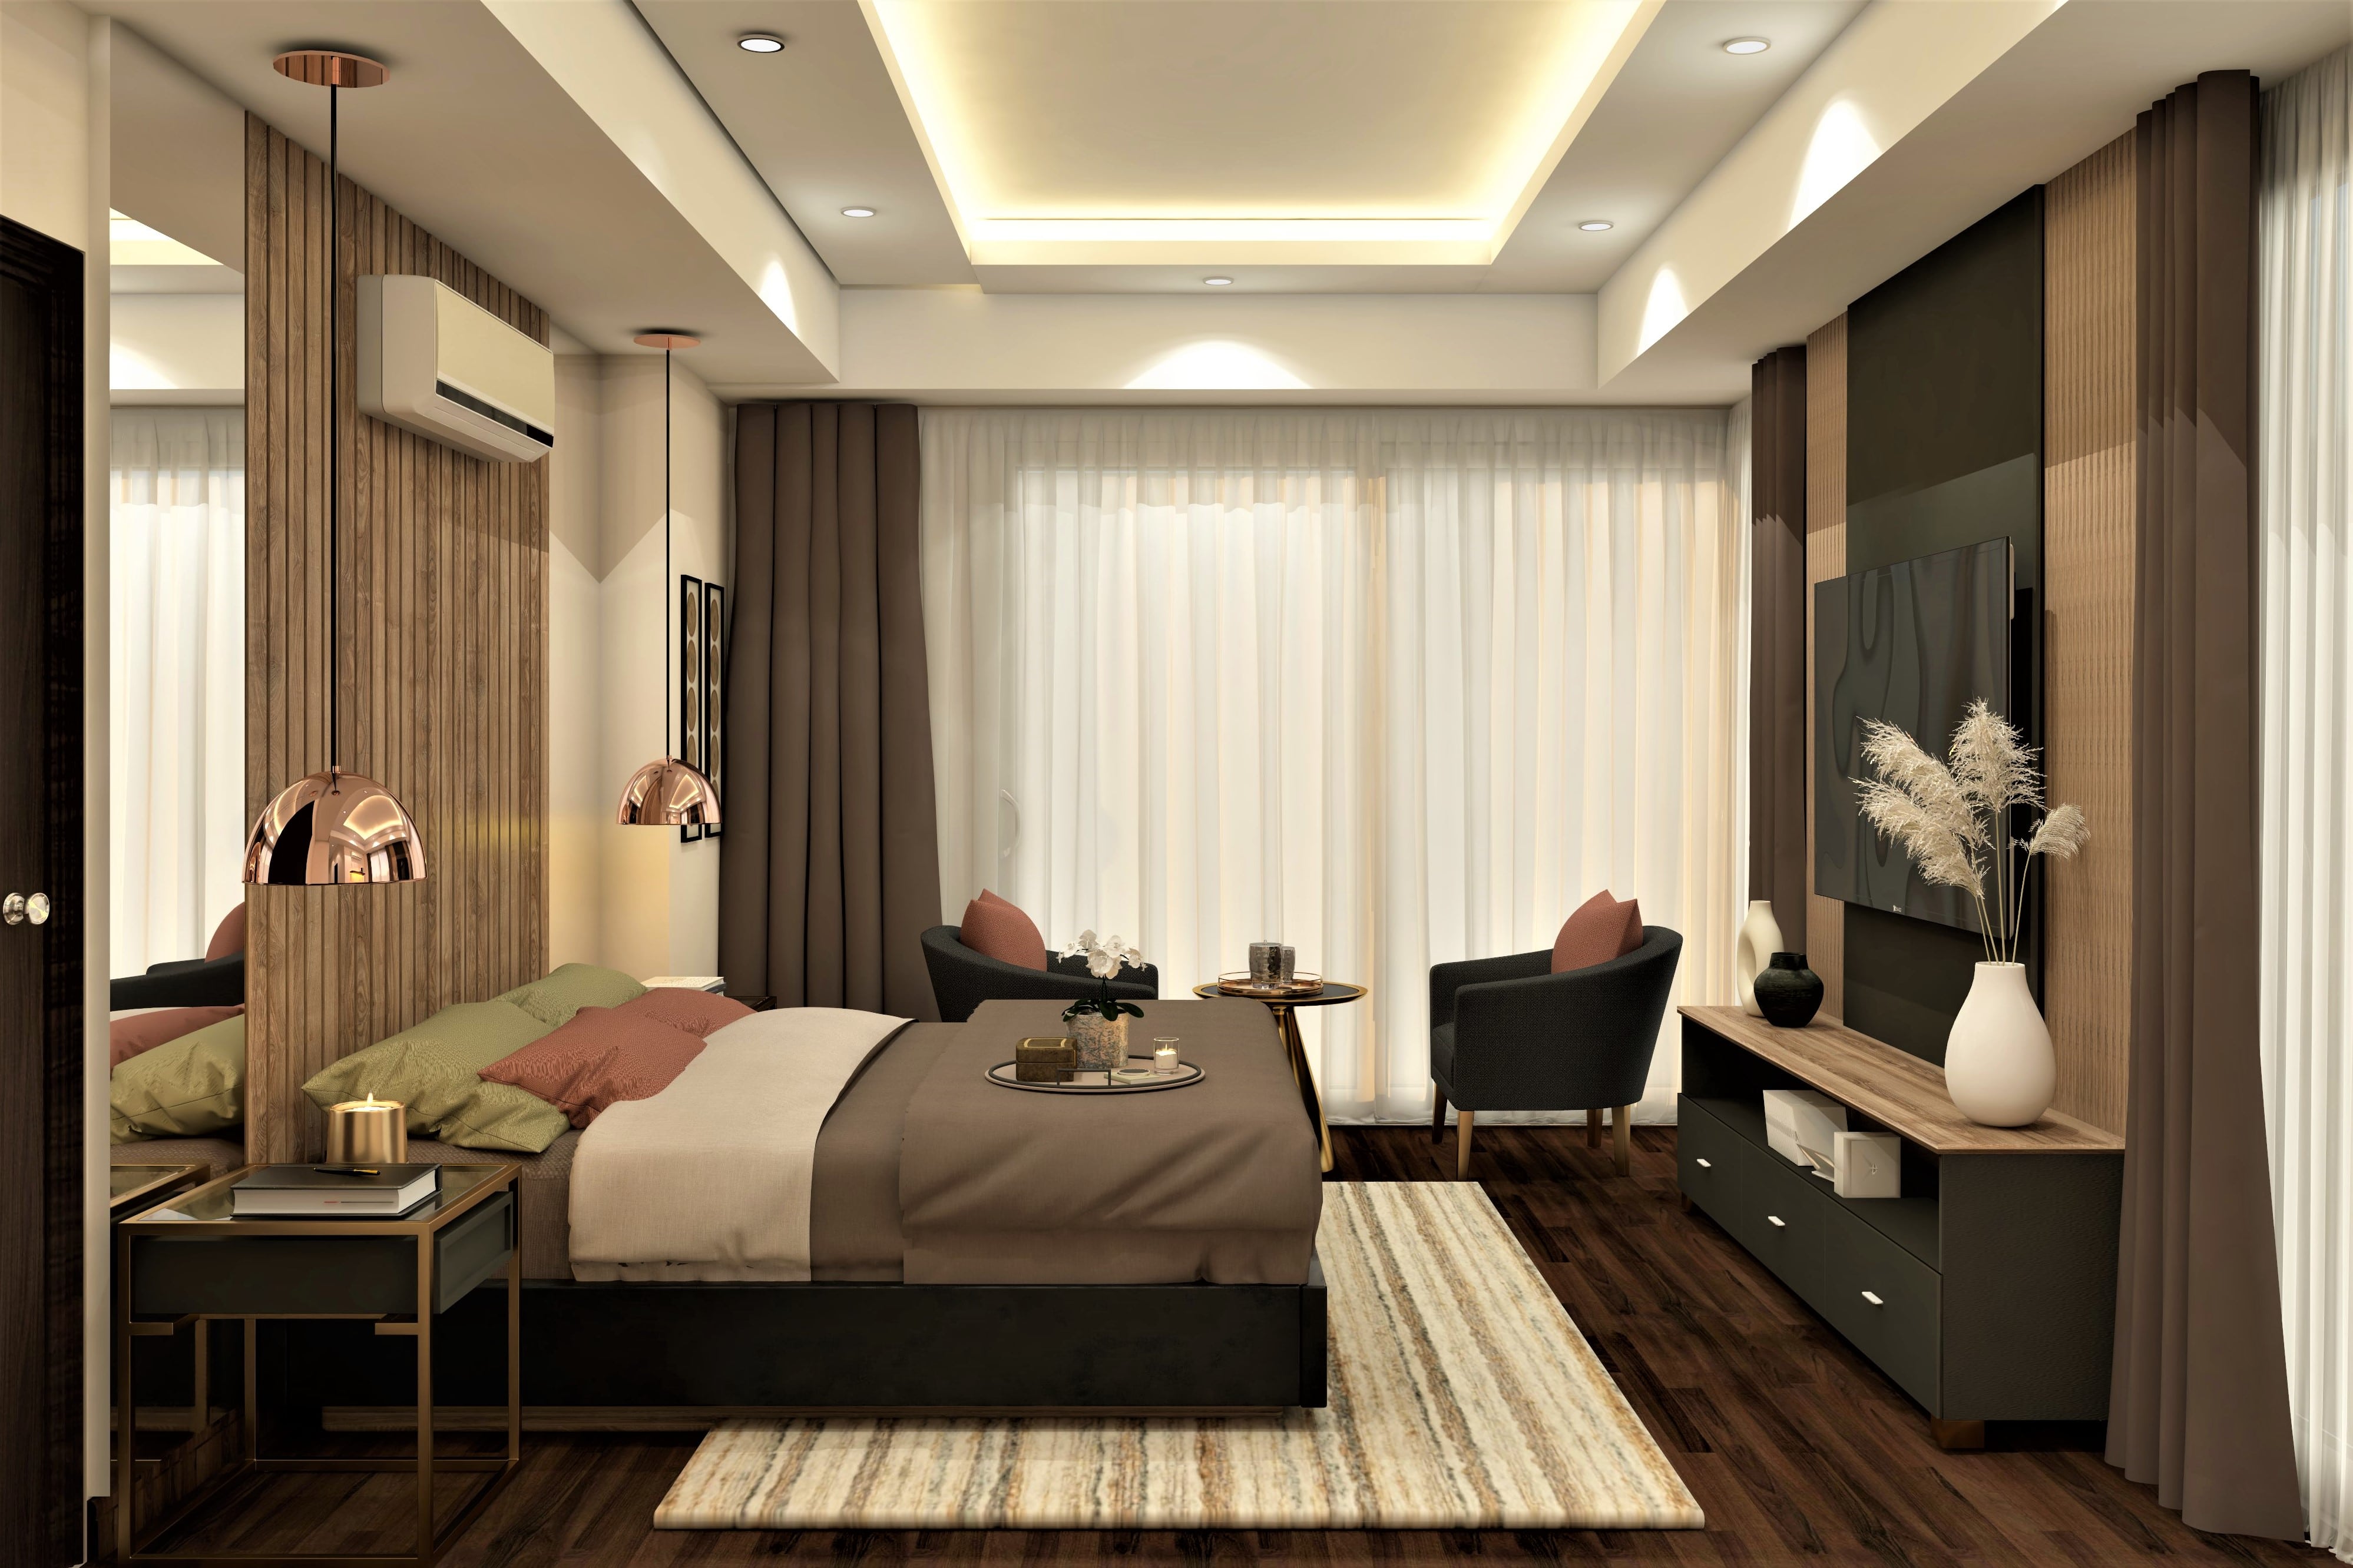 Luxurious bedroom design with wooden elements - Beautiful Homes